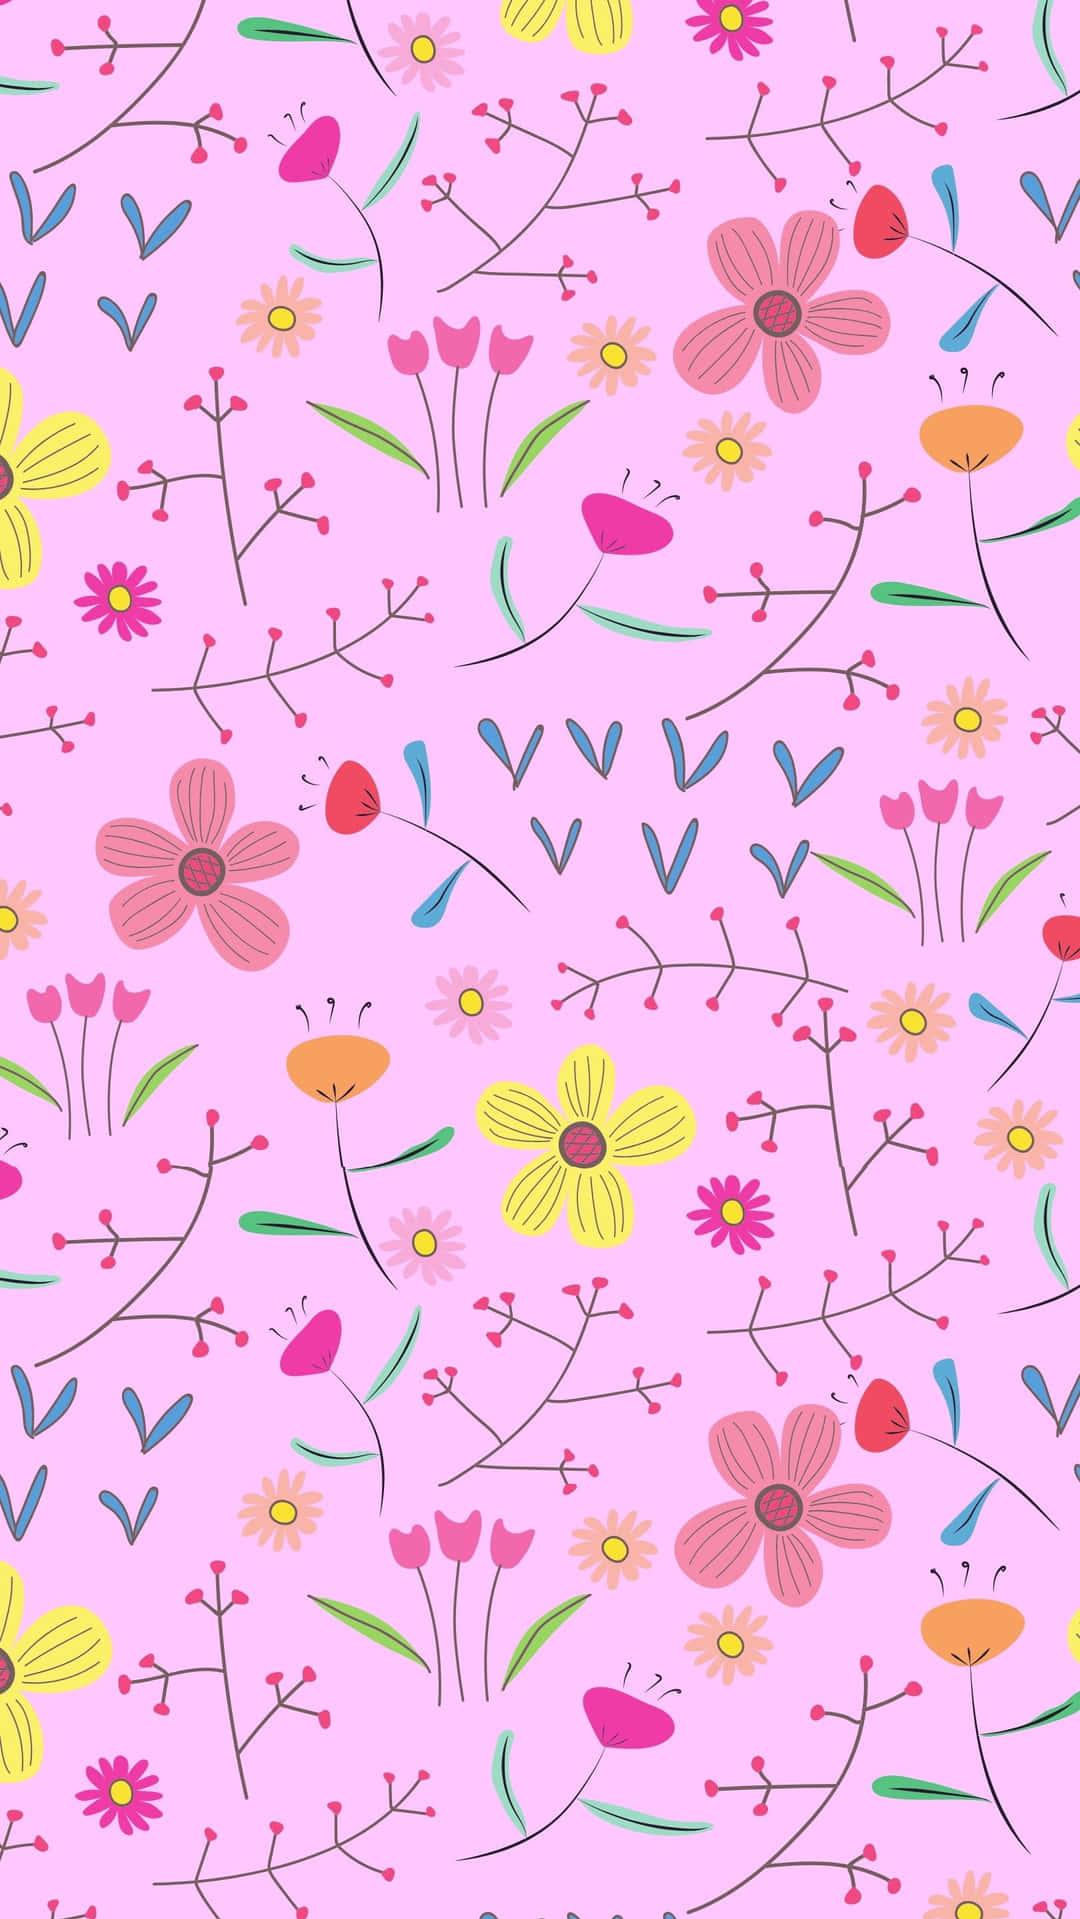 Download Adorable Kawaii Flower Brightening Your Day Wallpaper